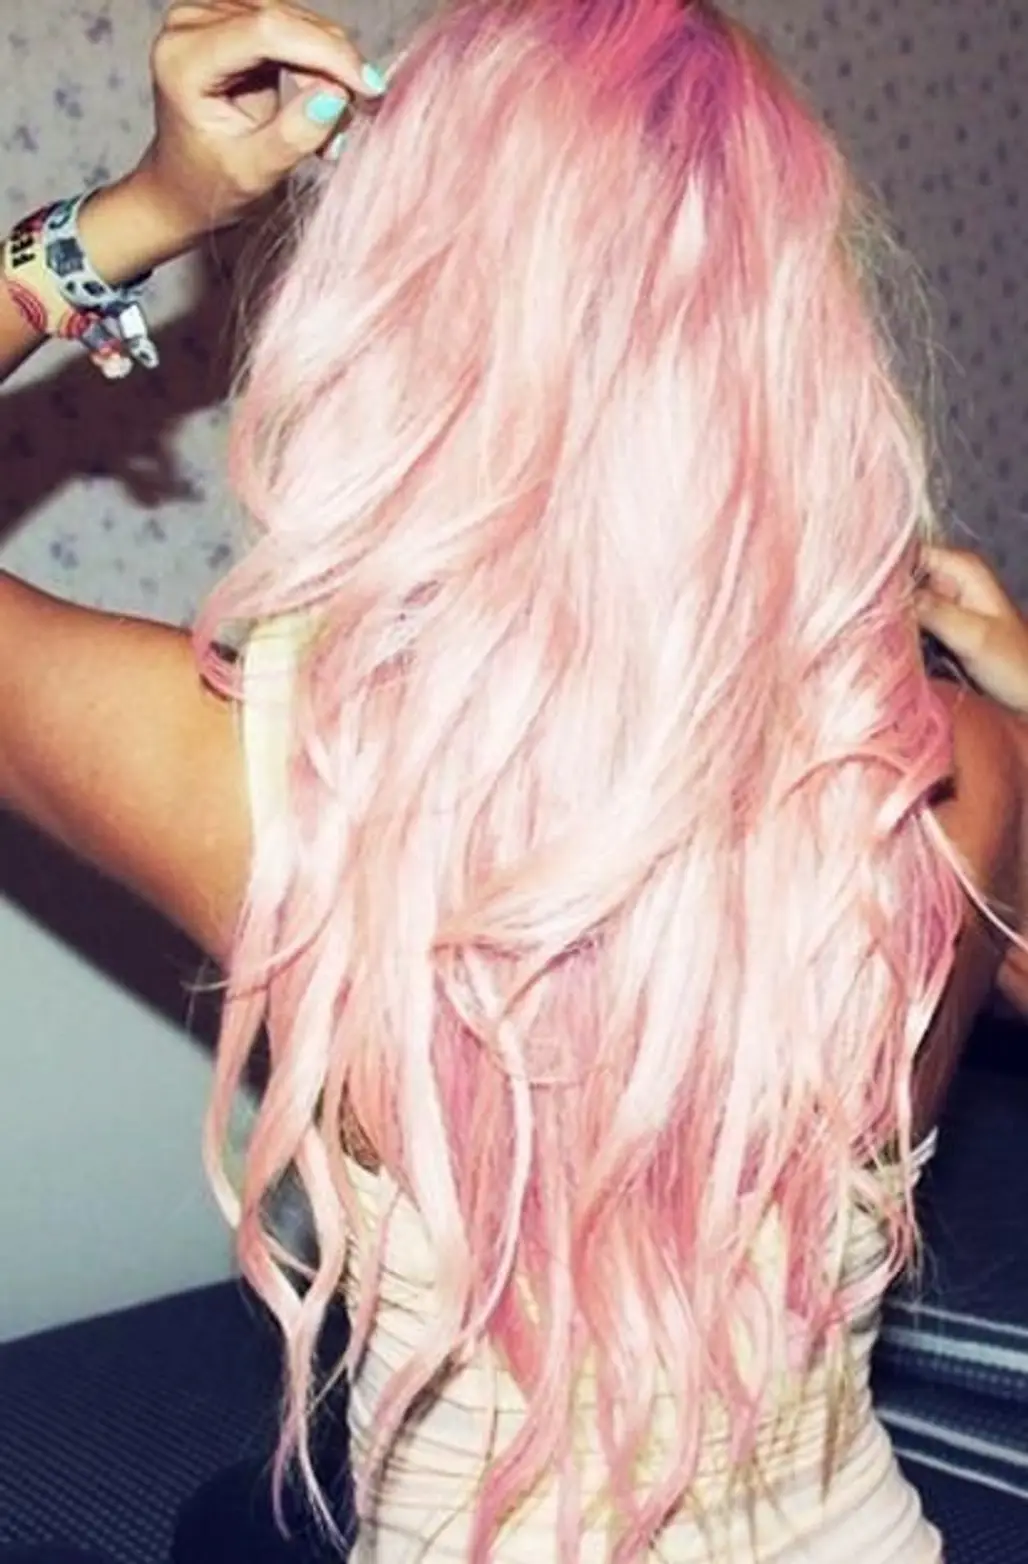 hair,human hair color,blond,face,pink,